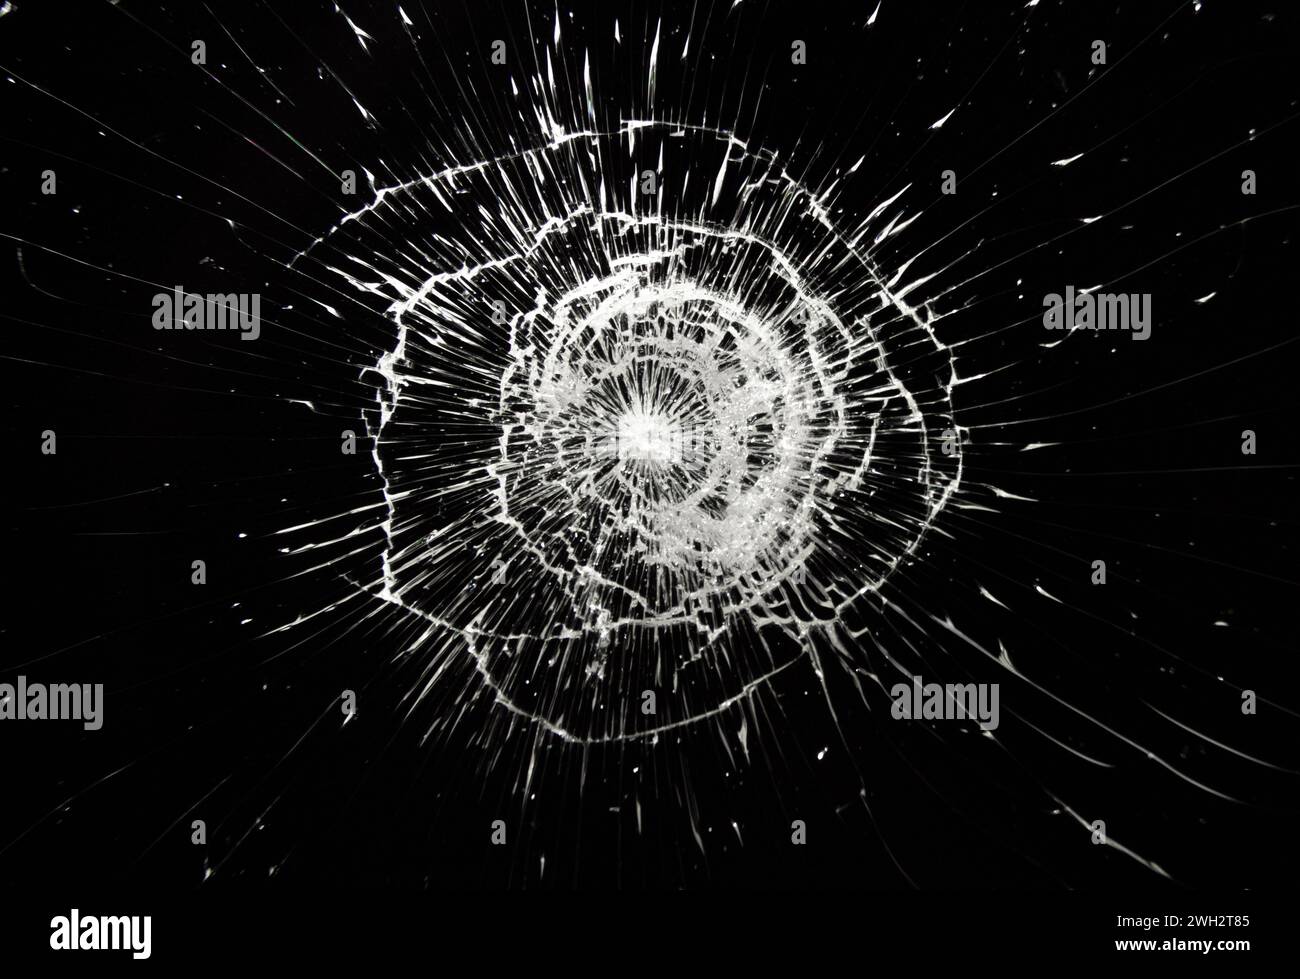 Cracked glass texture on black background. Stock Photo